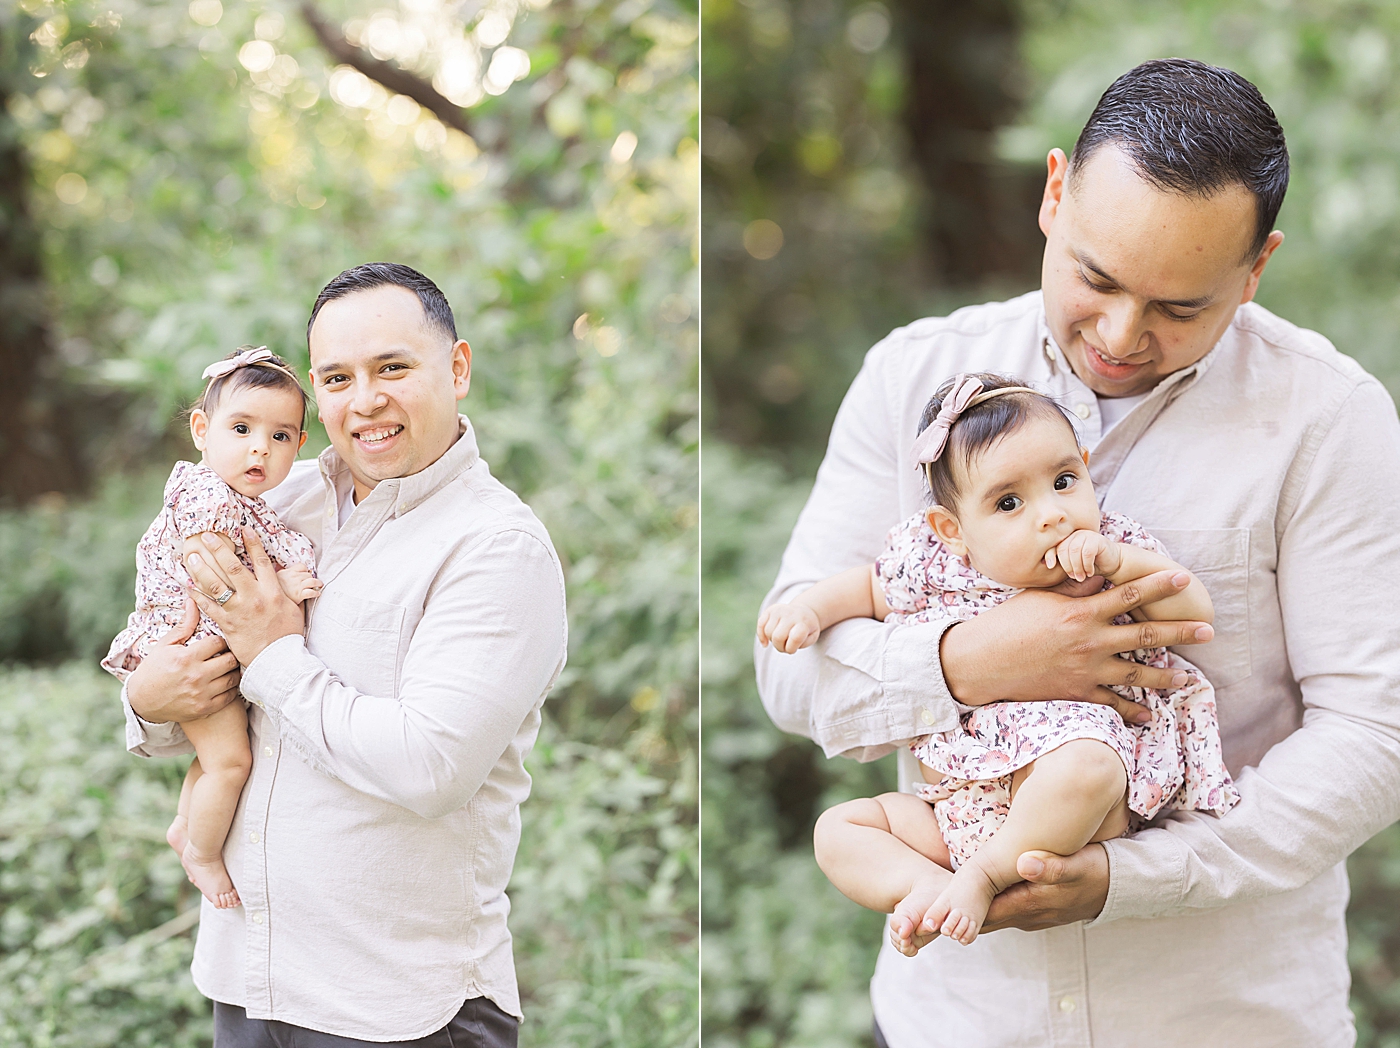 Dad holding his three month old daughter. Photo by Fresh Light Photography.